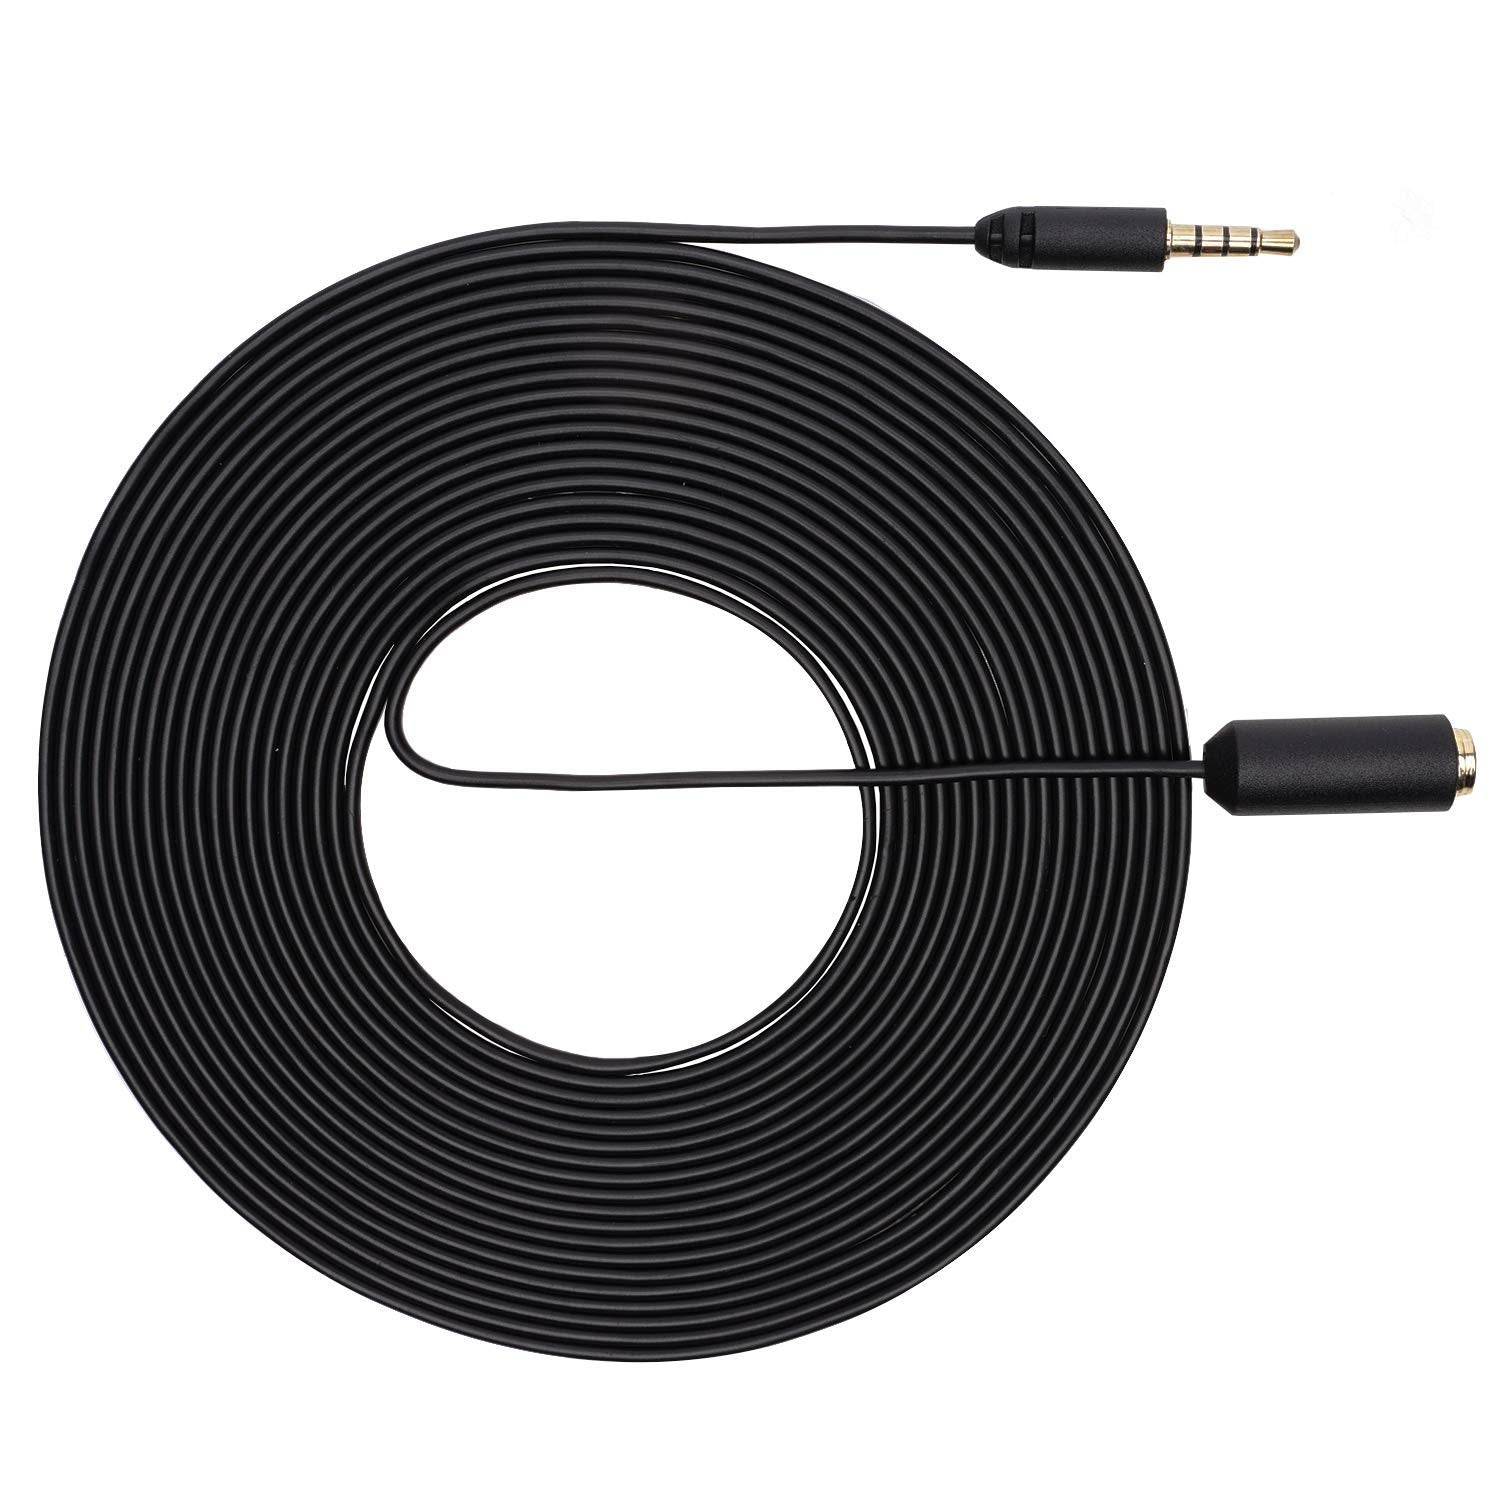 Movo PM10EC6 3.5mm Mic Extension Cord 20 Ft - Male to Female 3.5mm TRRS Microphone Extension Cable - Aux Cord for iPhone, Android Mic Cord TRRS Extension Cable for Lav Mics  - Very Good